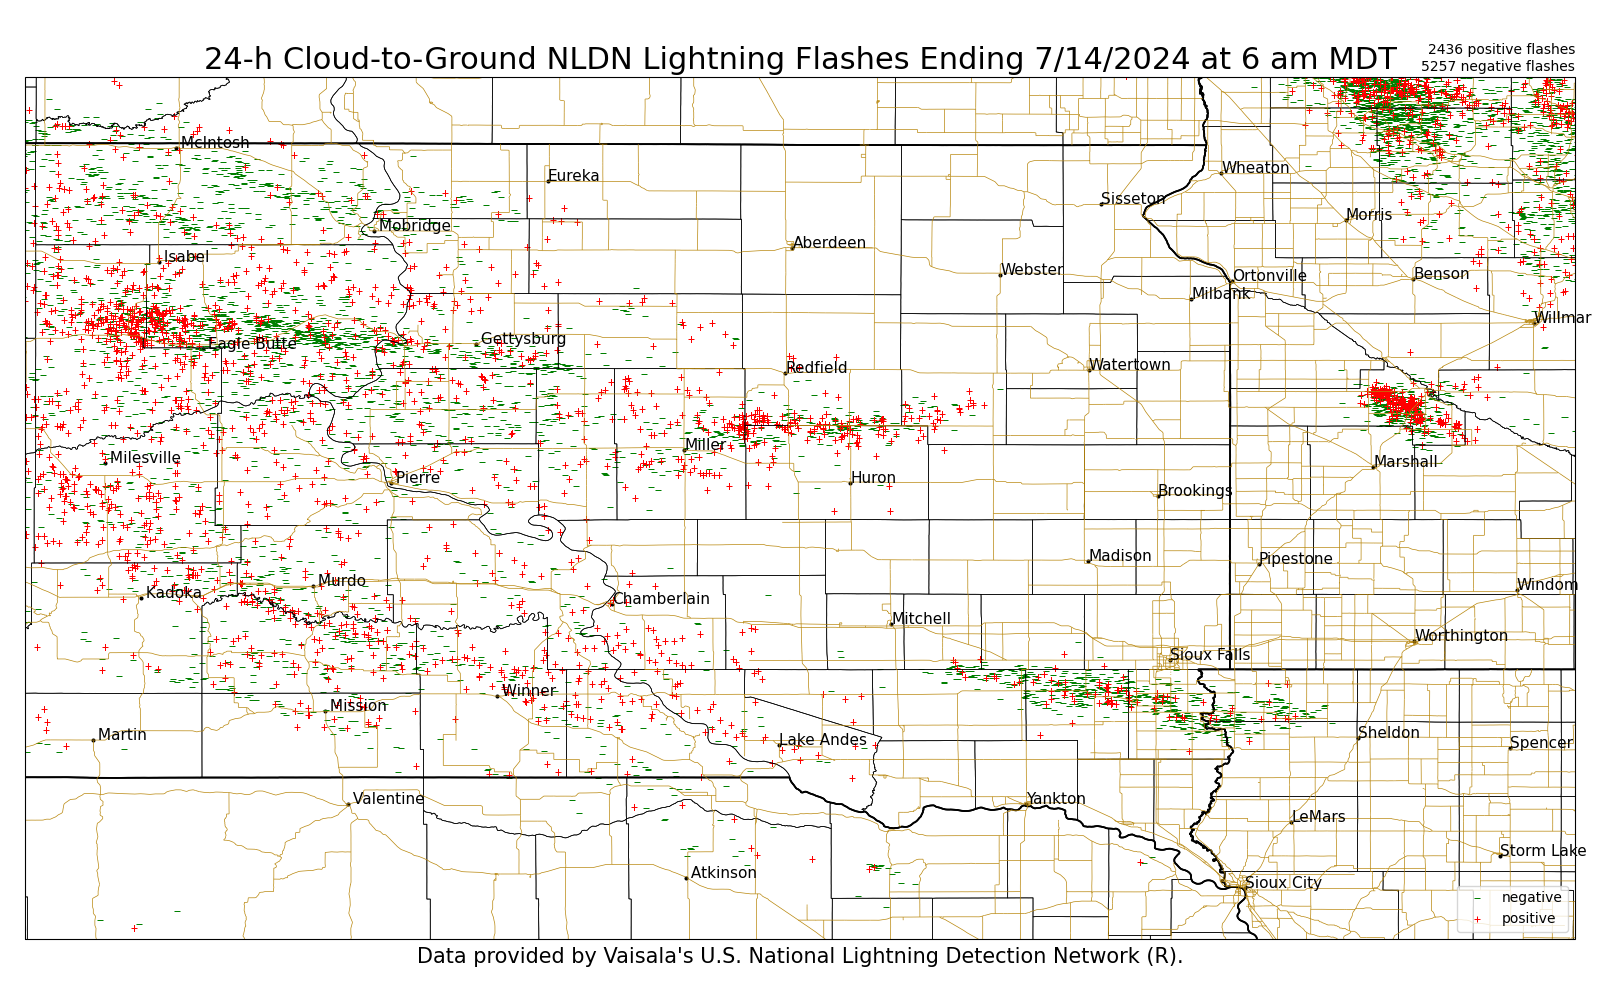 24 hour Cloud to Ground Lightning Strikes, ending at 7am CDT on July 14, 2024